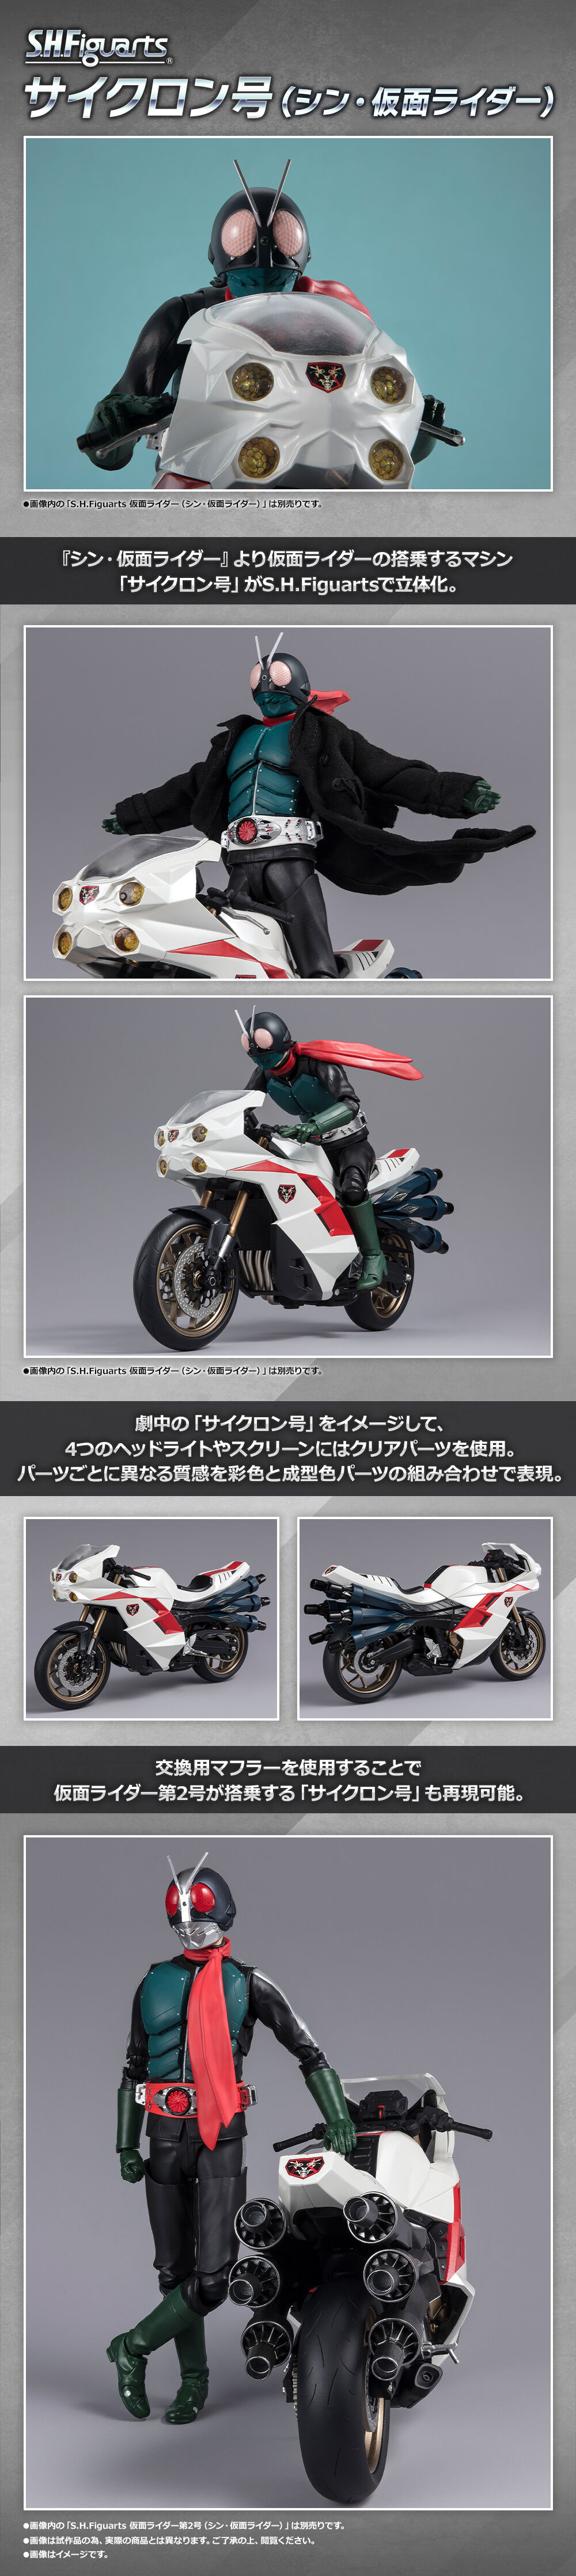 s.h.figuarts シン仮面ライダー 1号 2号 サイクロン号セット